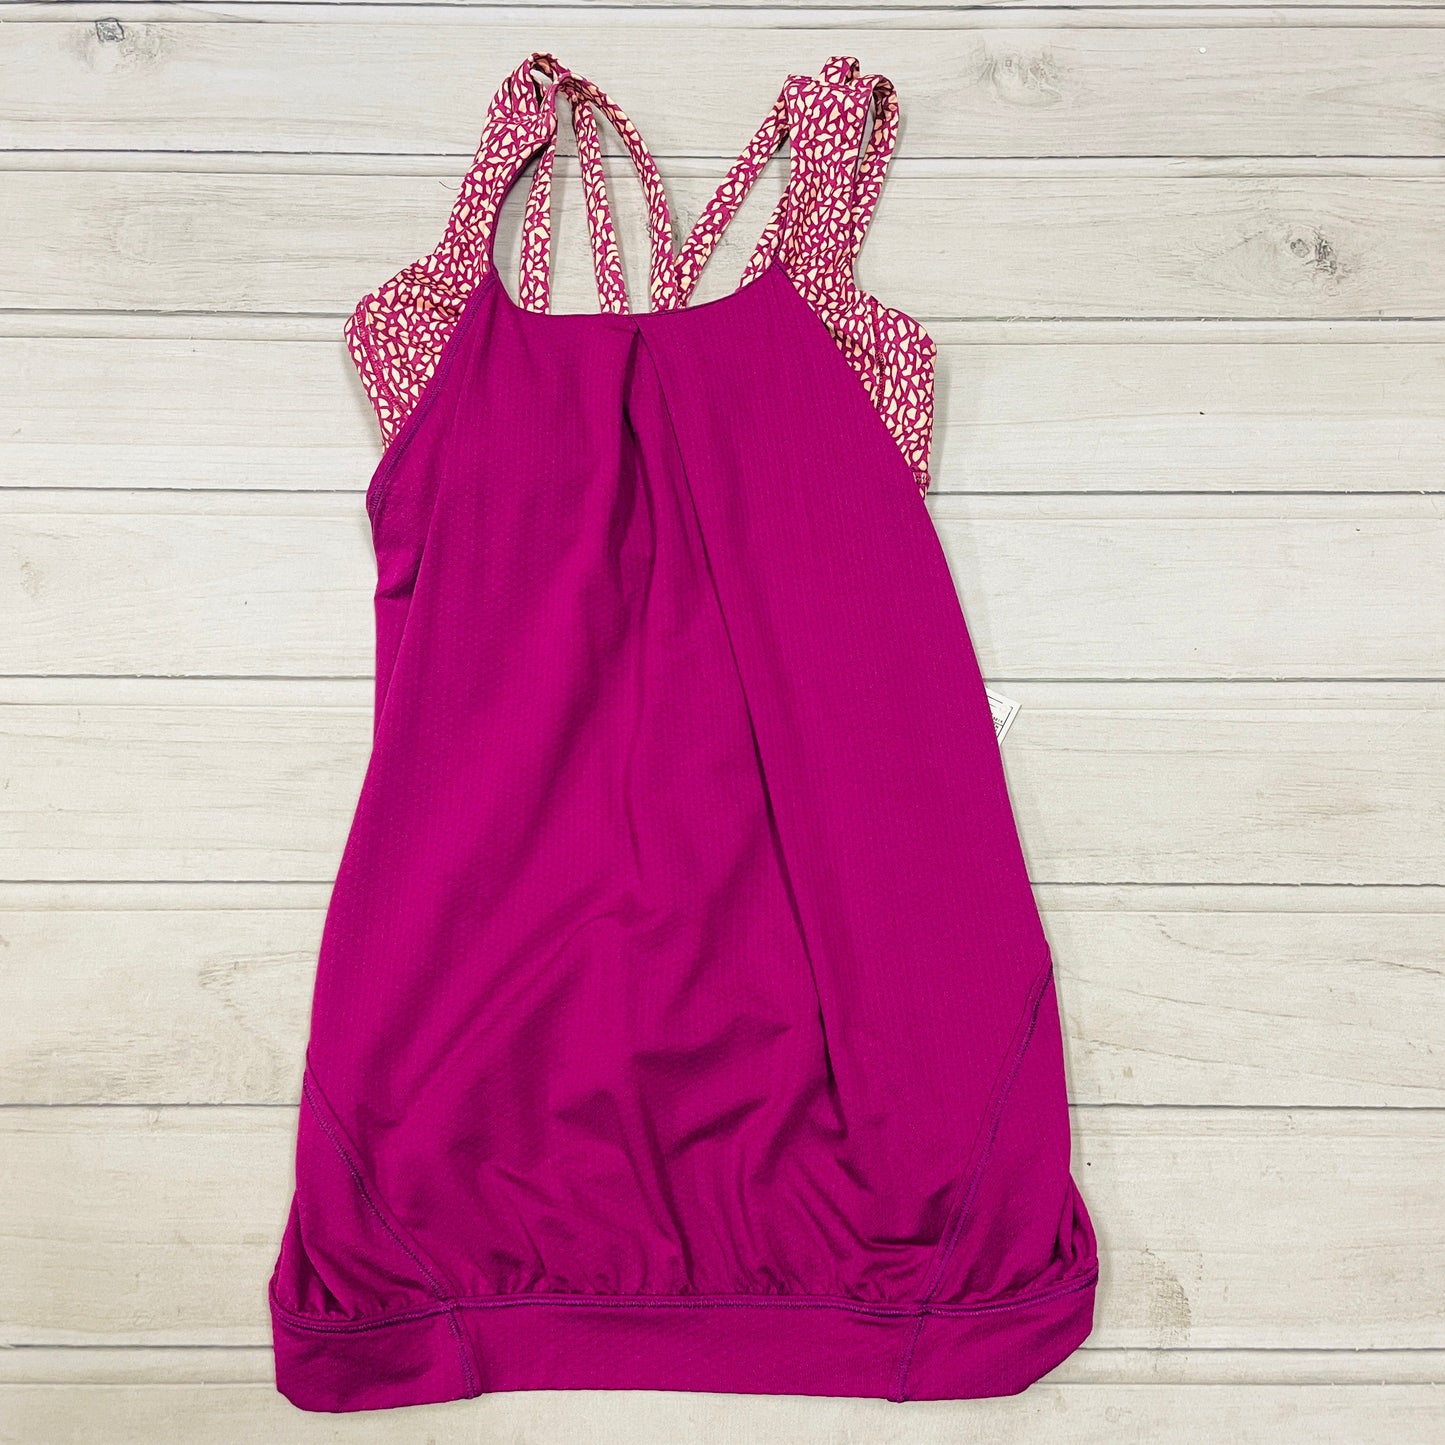 Athletic Tank Top by Lululemon size M